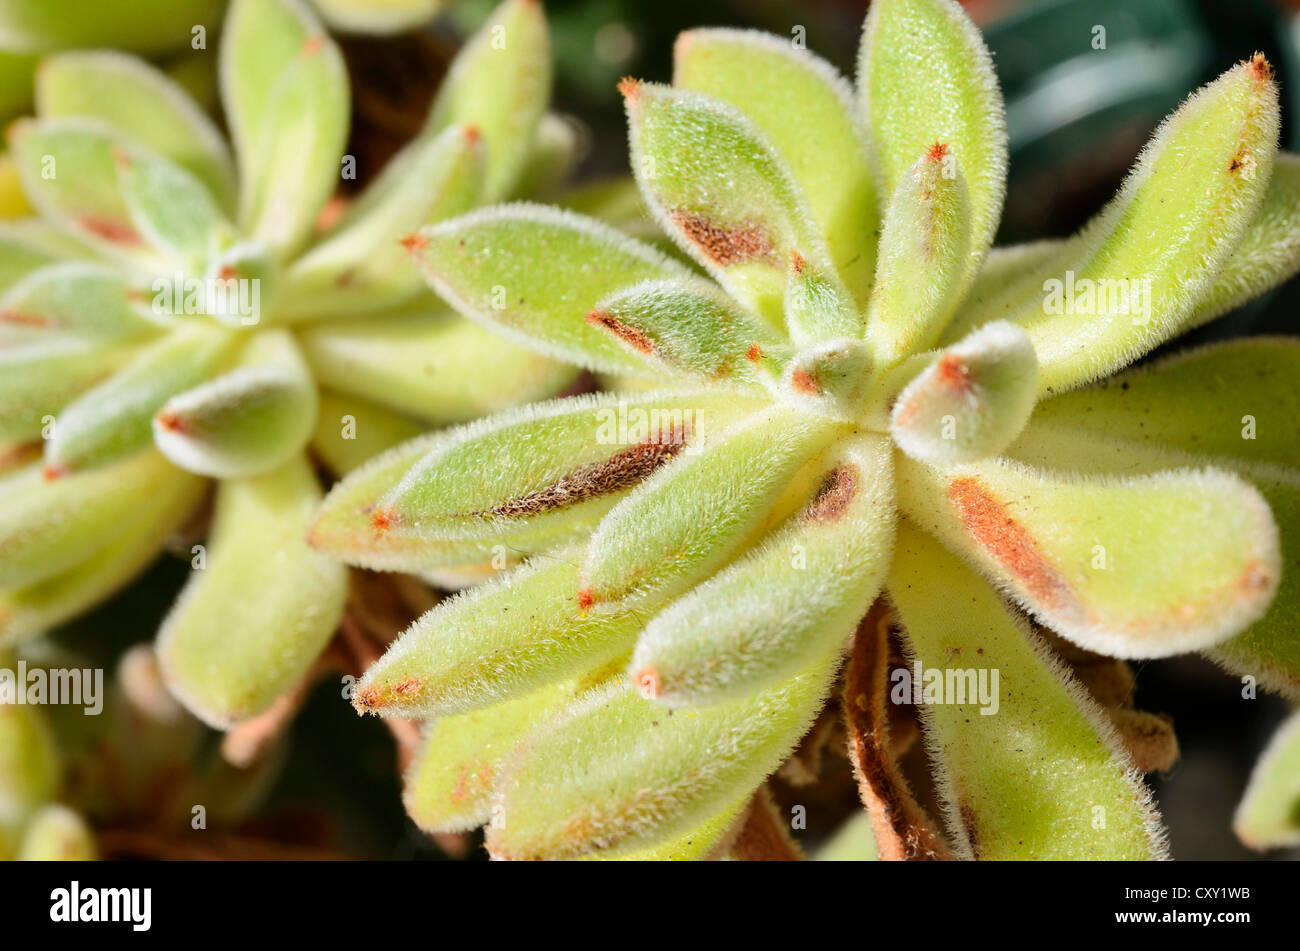 Firecracker Plant (Echeveria setosa), succulent plant with hairy leaves Stock Photo